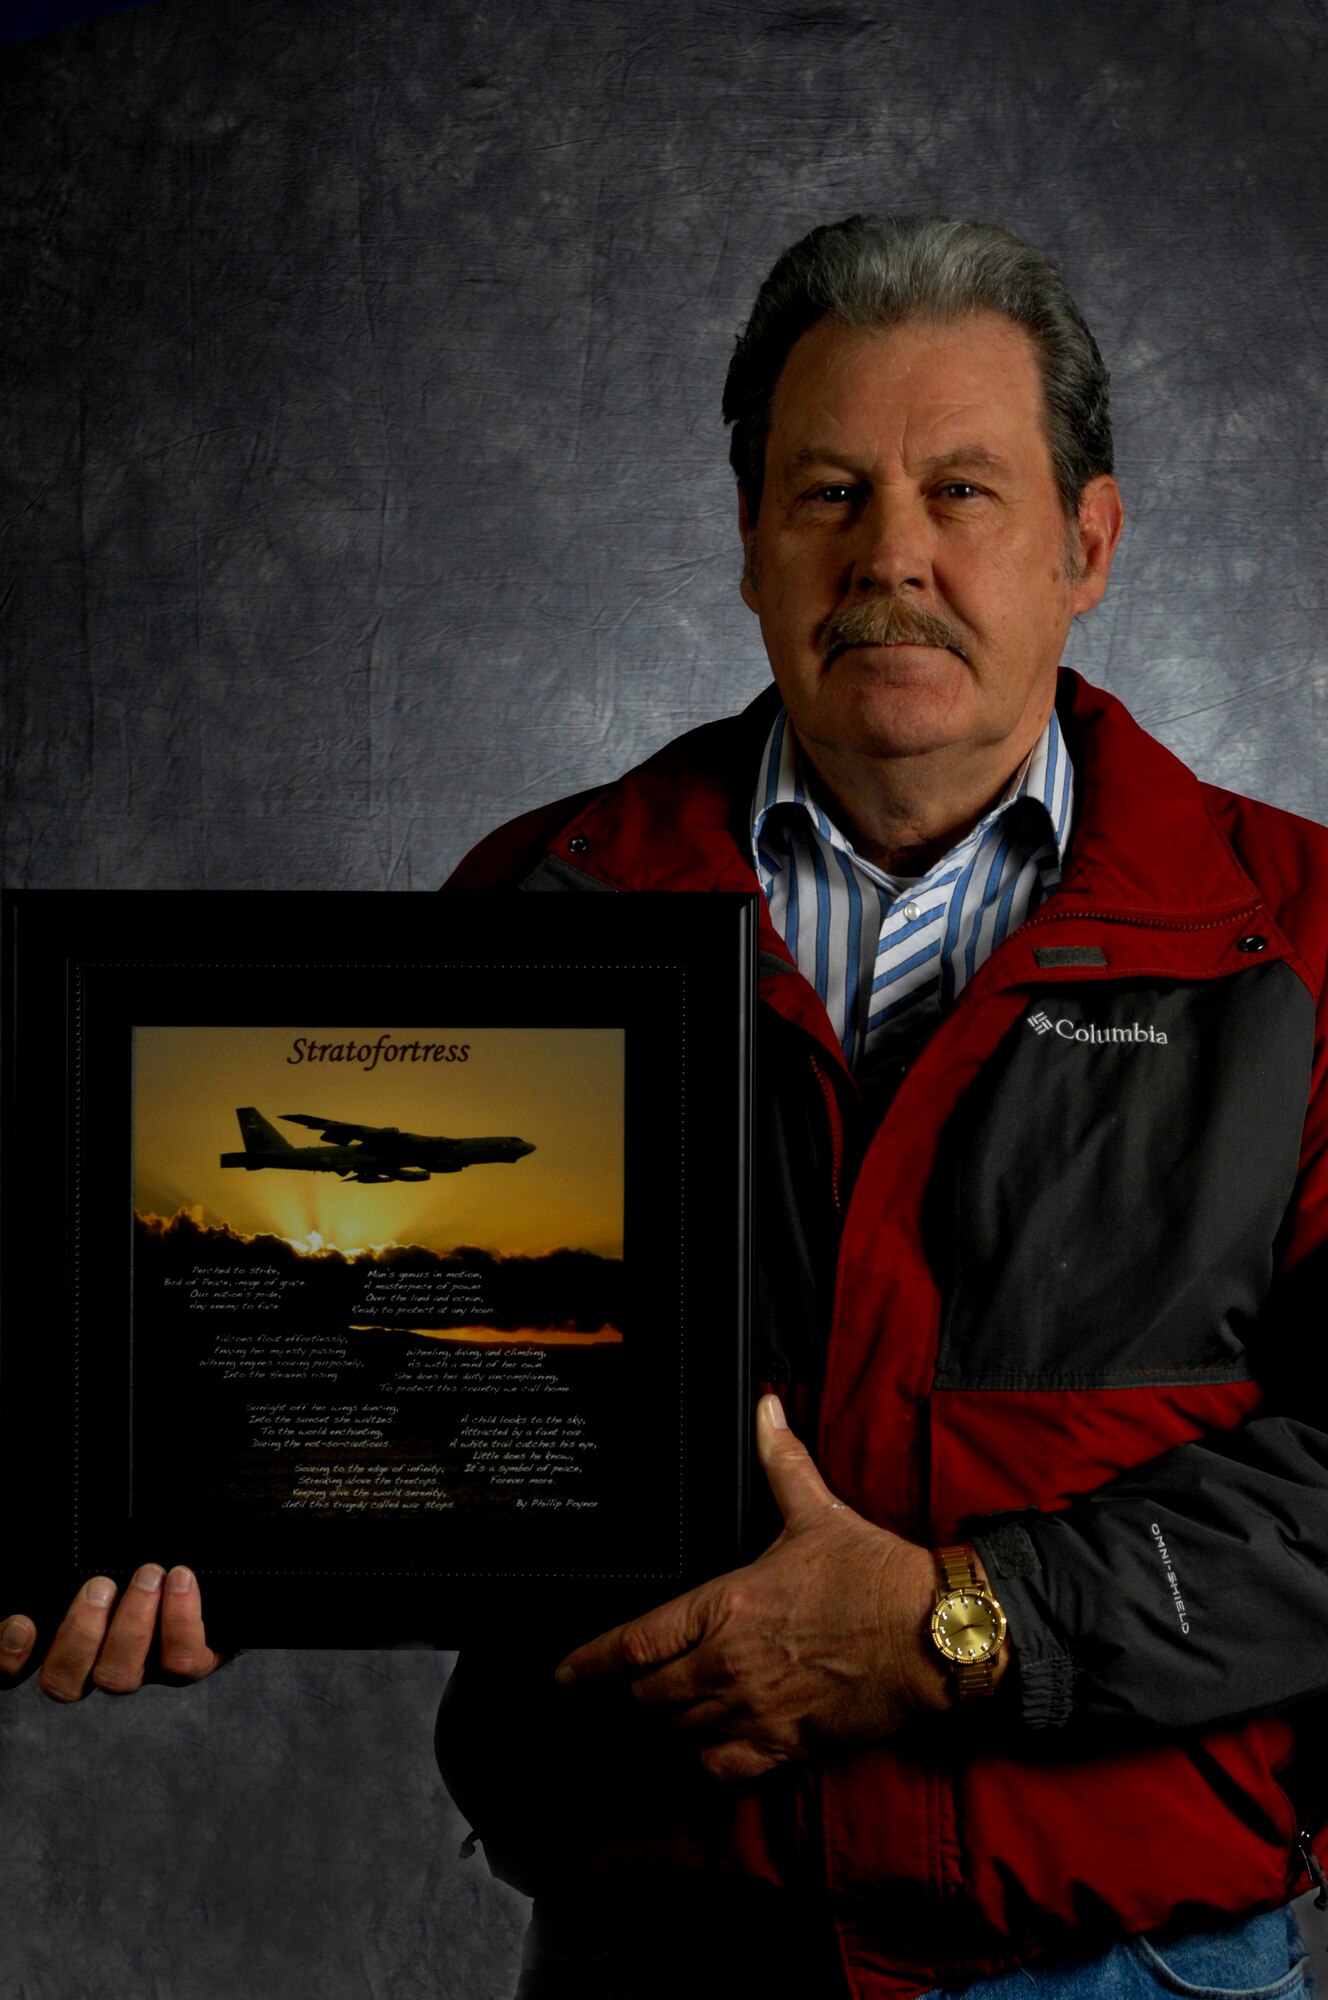 MINOT AIR FORCE BASE, N.D. -- Phillip Poynor, a retired Air Force defense fi re control system technician, wrote a poem inspired by the B-52H Stratofortress in 1973. The poem was laid on top of a picture of the B-52 and was given as a gift from Poynor’s son, Tech. Sgt. Jason Poynor, and his fi ancée, Gina. The picture was on display in the 5th Bomb Wing Headquarters building for a week in March. (U.S. Air Force photo/Senior Airman Jesse Lopez)